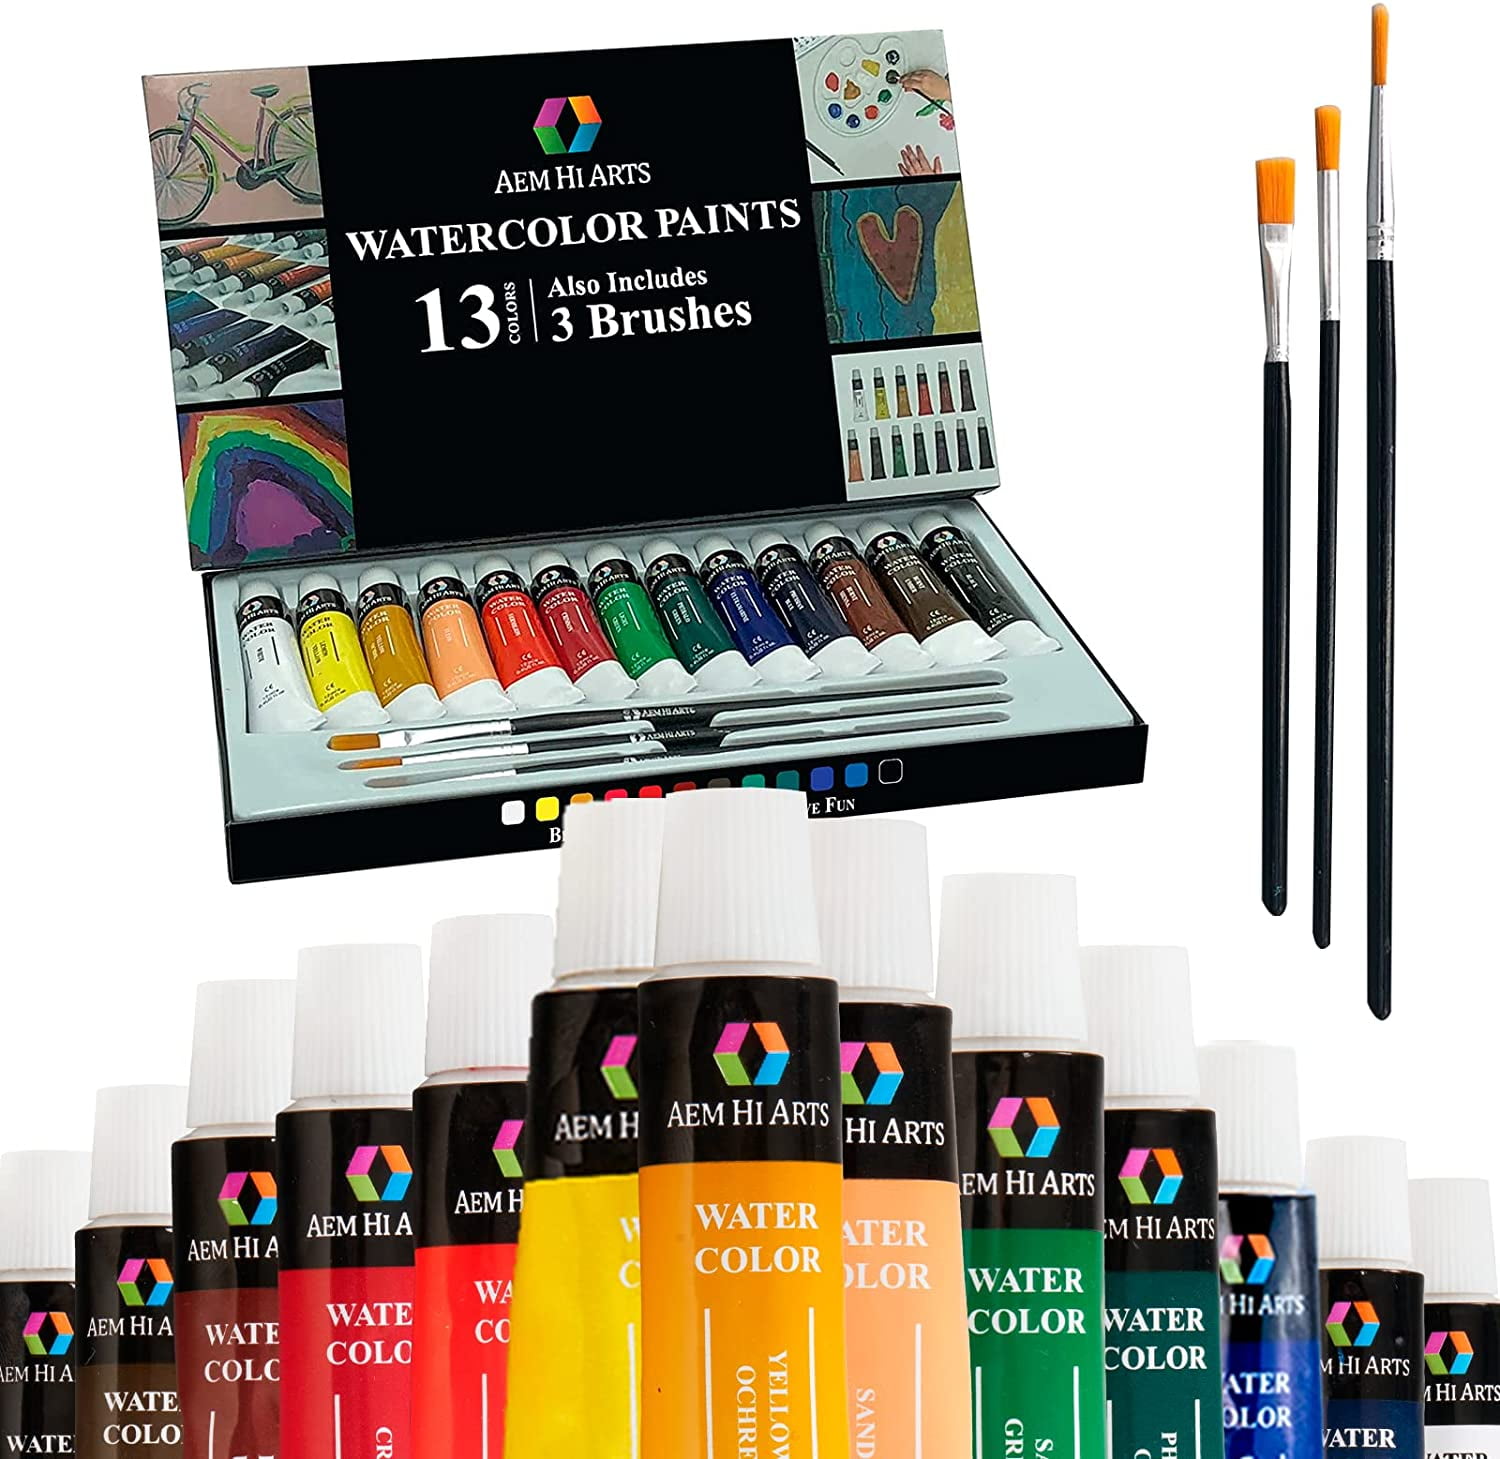 Nicpro Watercolor Paint Set, 48 Water Colors Kit with 3 Squirrel Brush